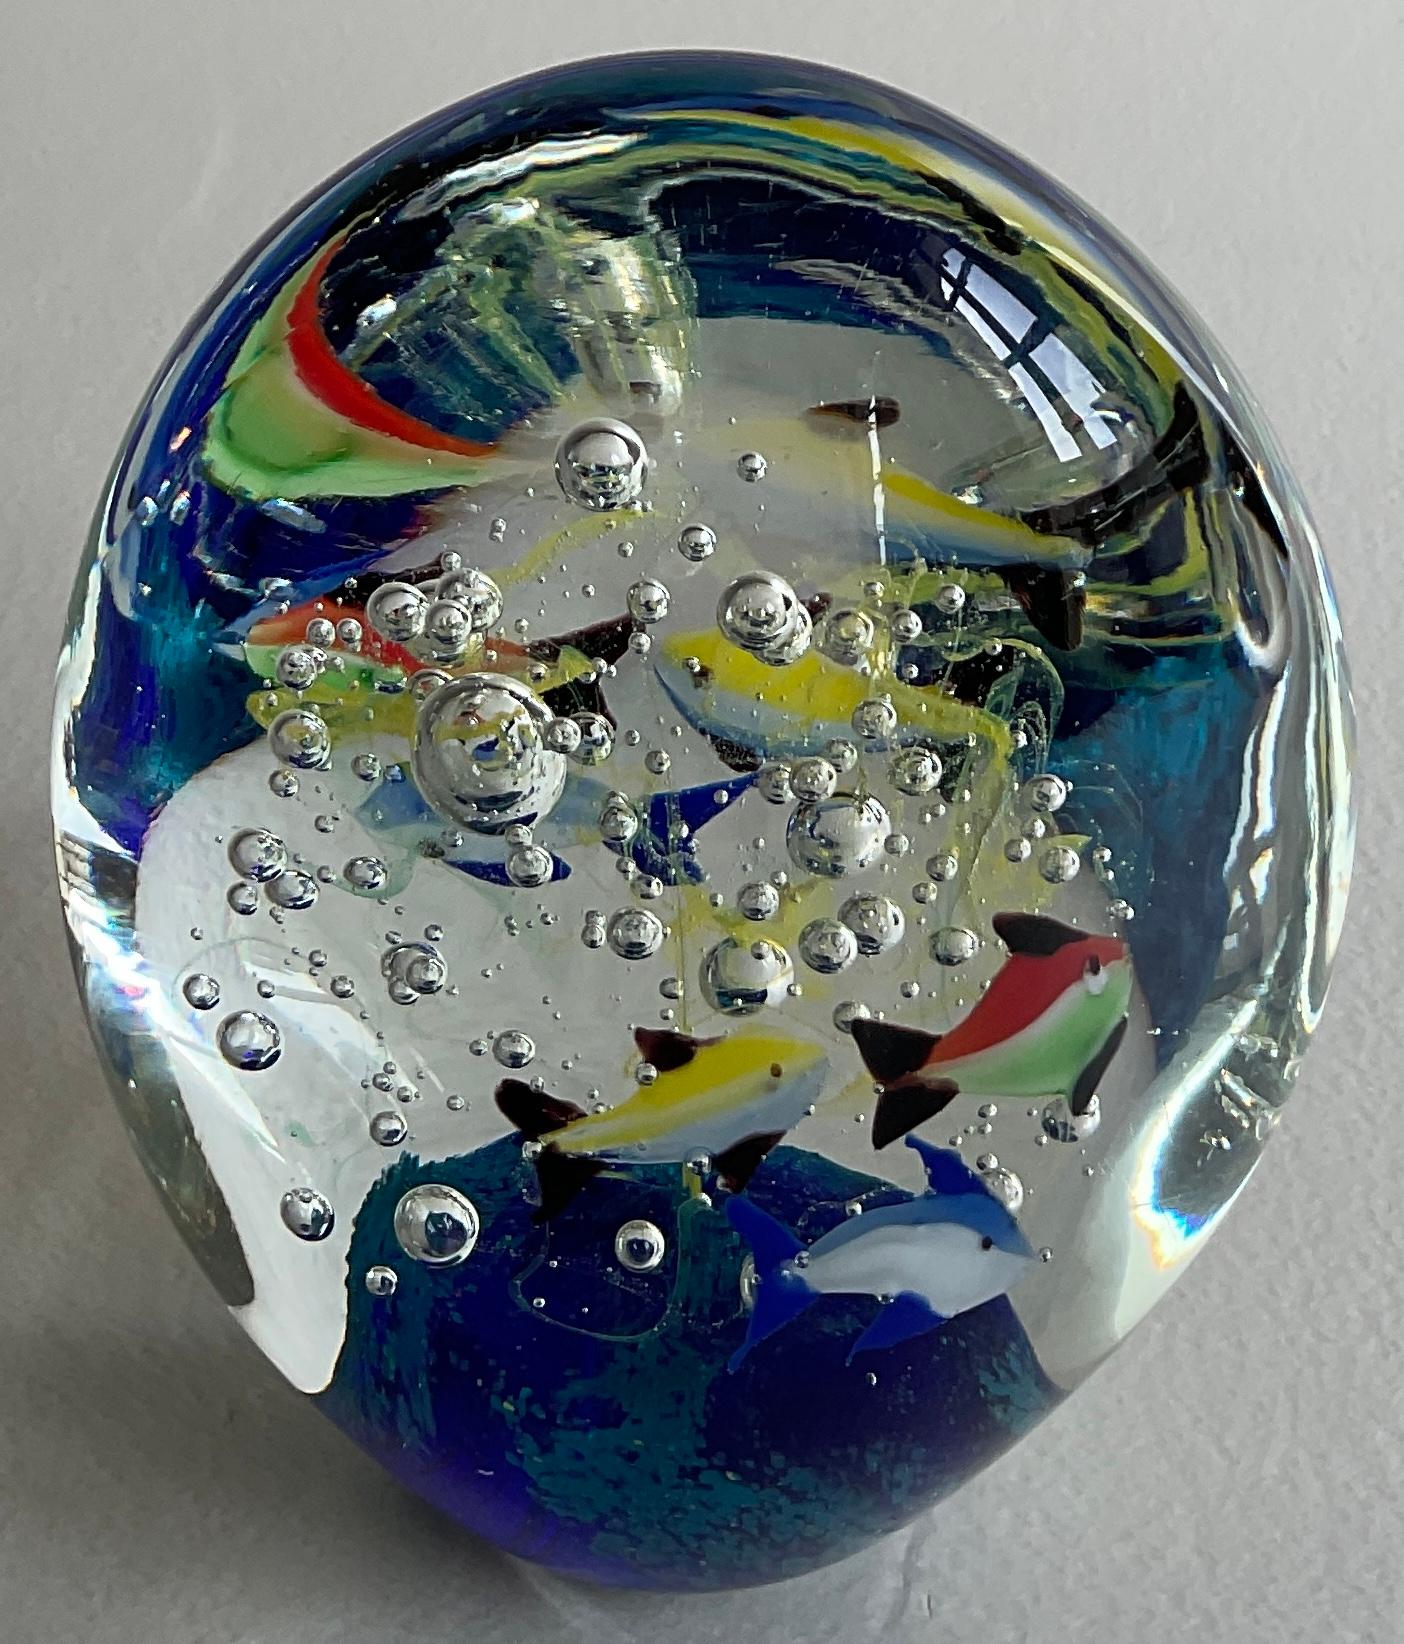 Very unique and rare shaped Murano paperweight depicting an ocean scene or an aquarium with fish, ocean plants and bubbles. 

This is a wonderfully animated and decorative piece. Perfect for any desk, table or shelf. 

Perfect vintage condition.